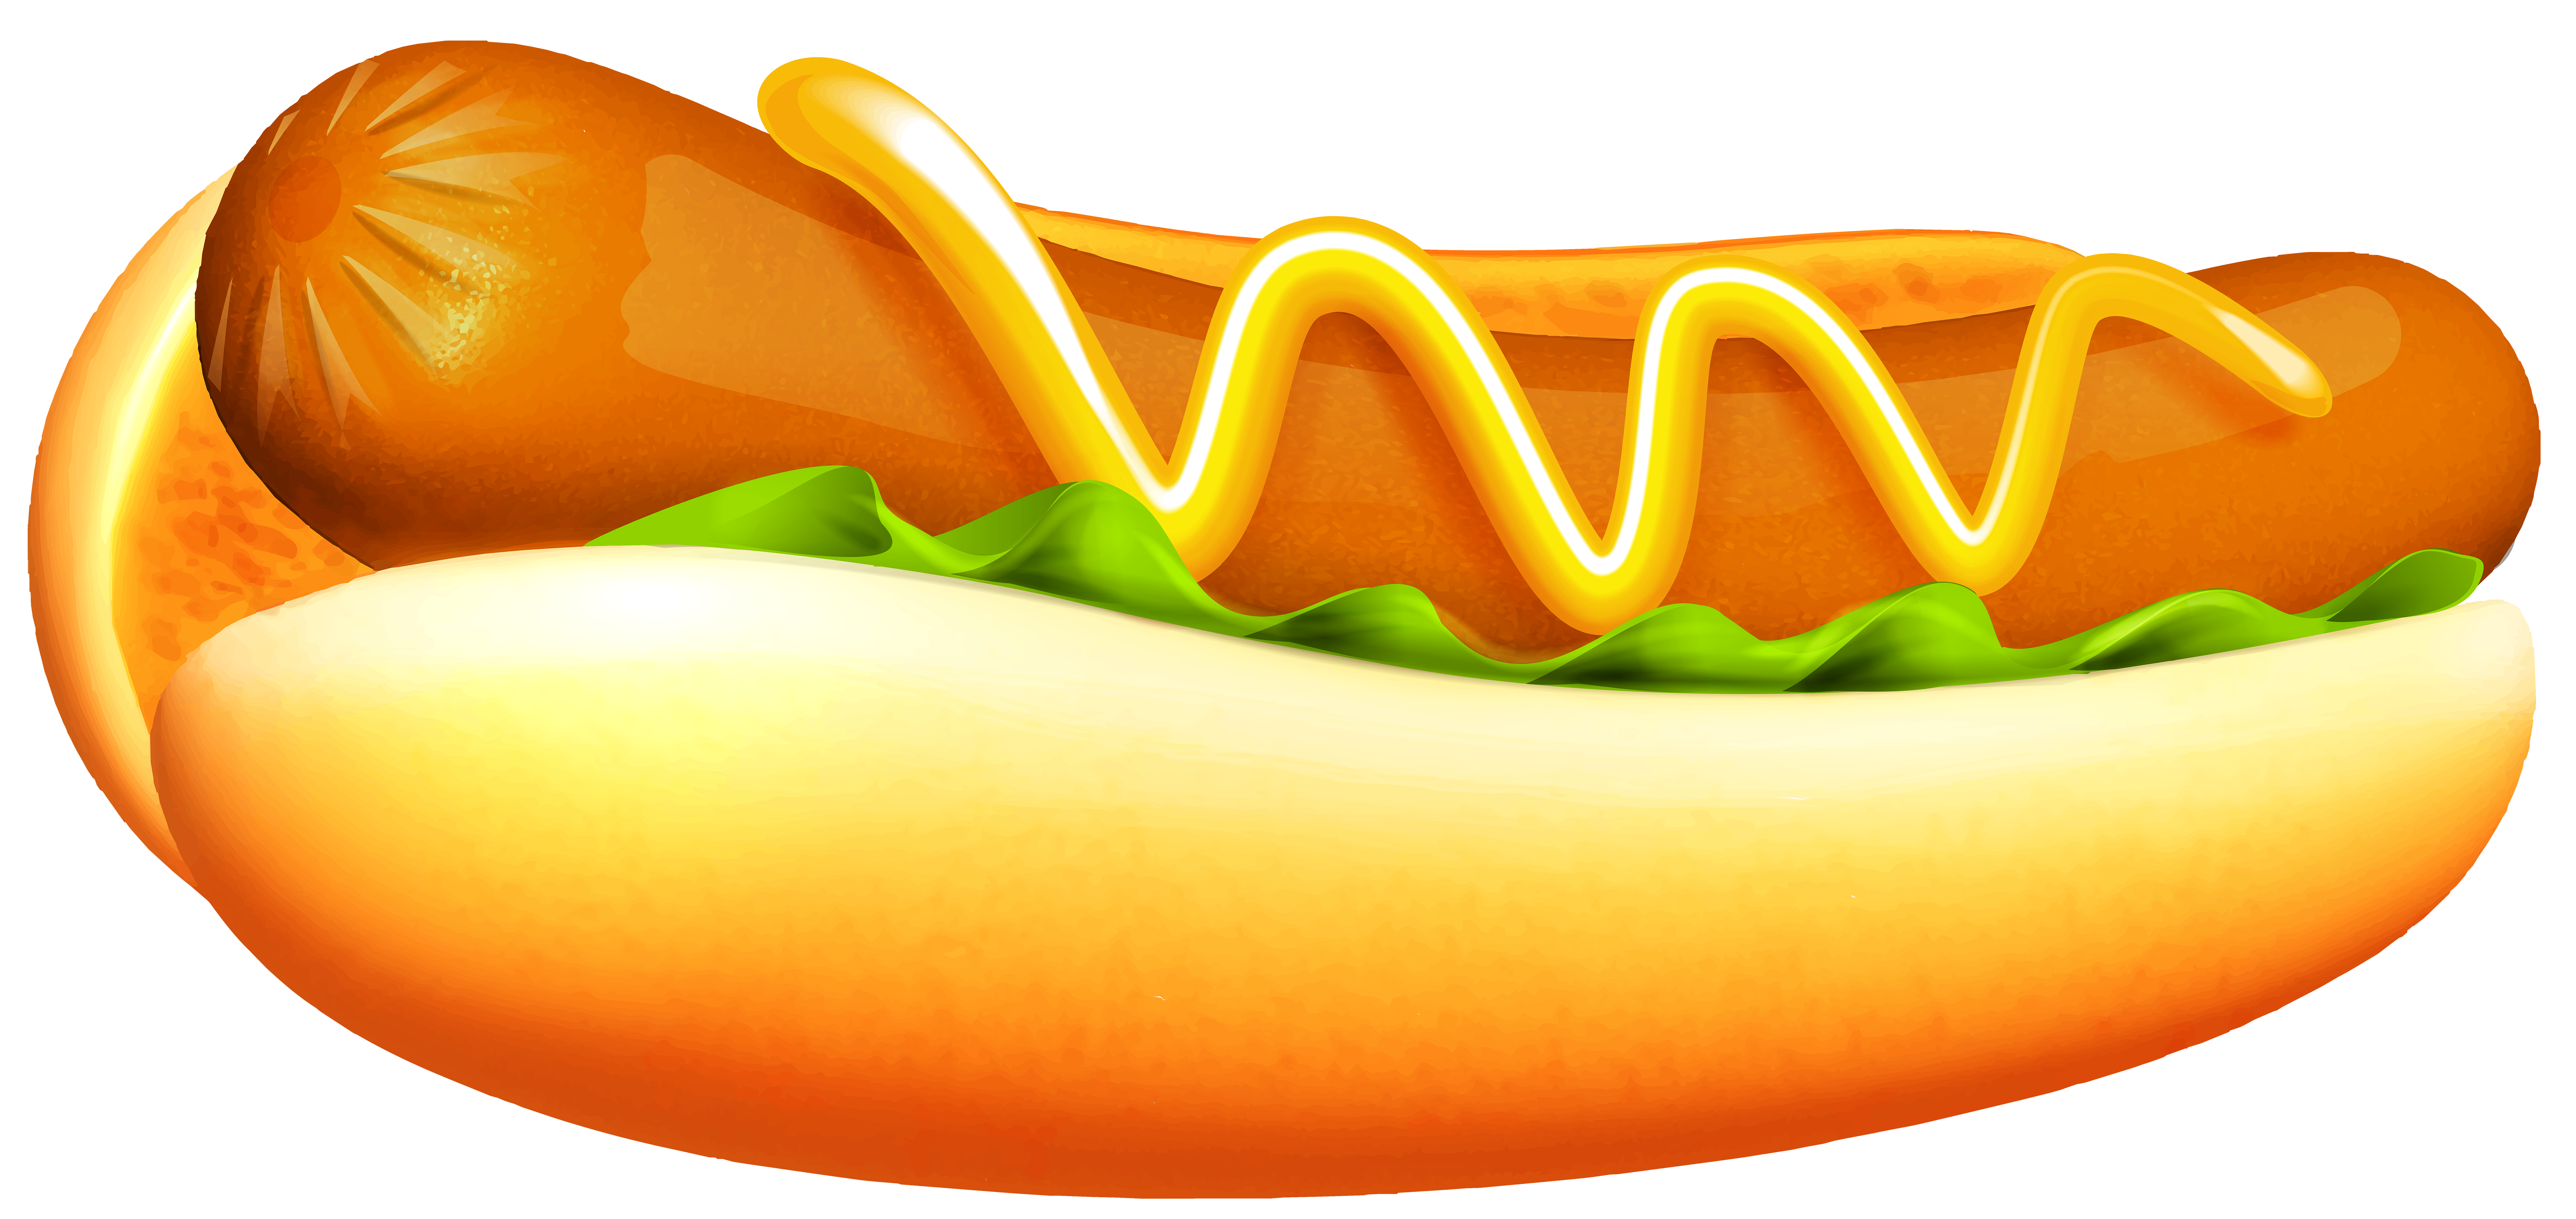 Hot Dog Transparent PNG Clipart Image | Gallery Yopriceville - High